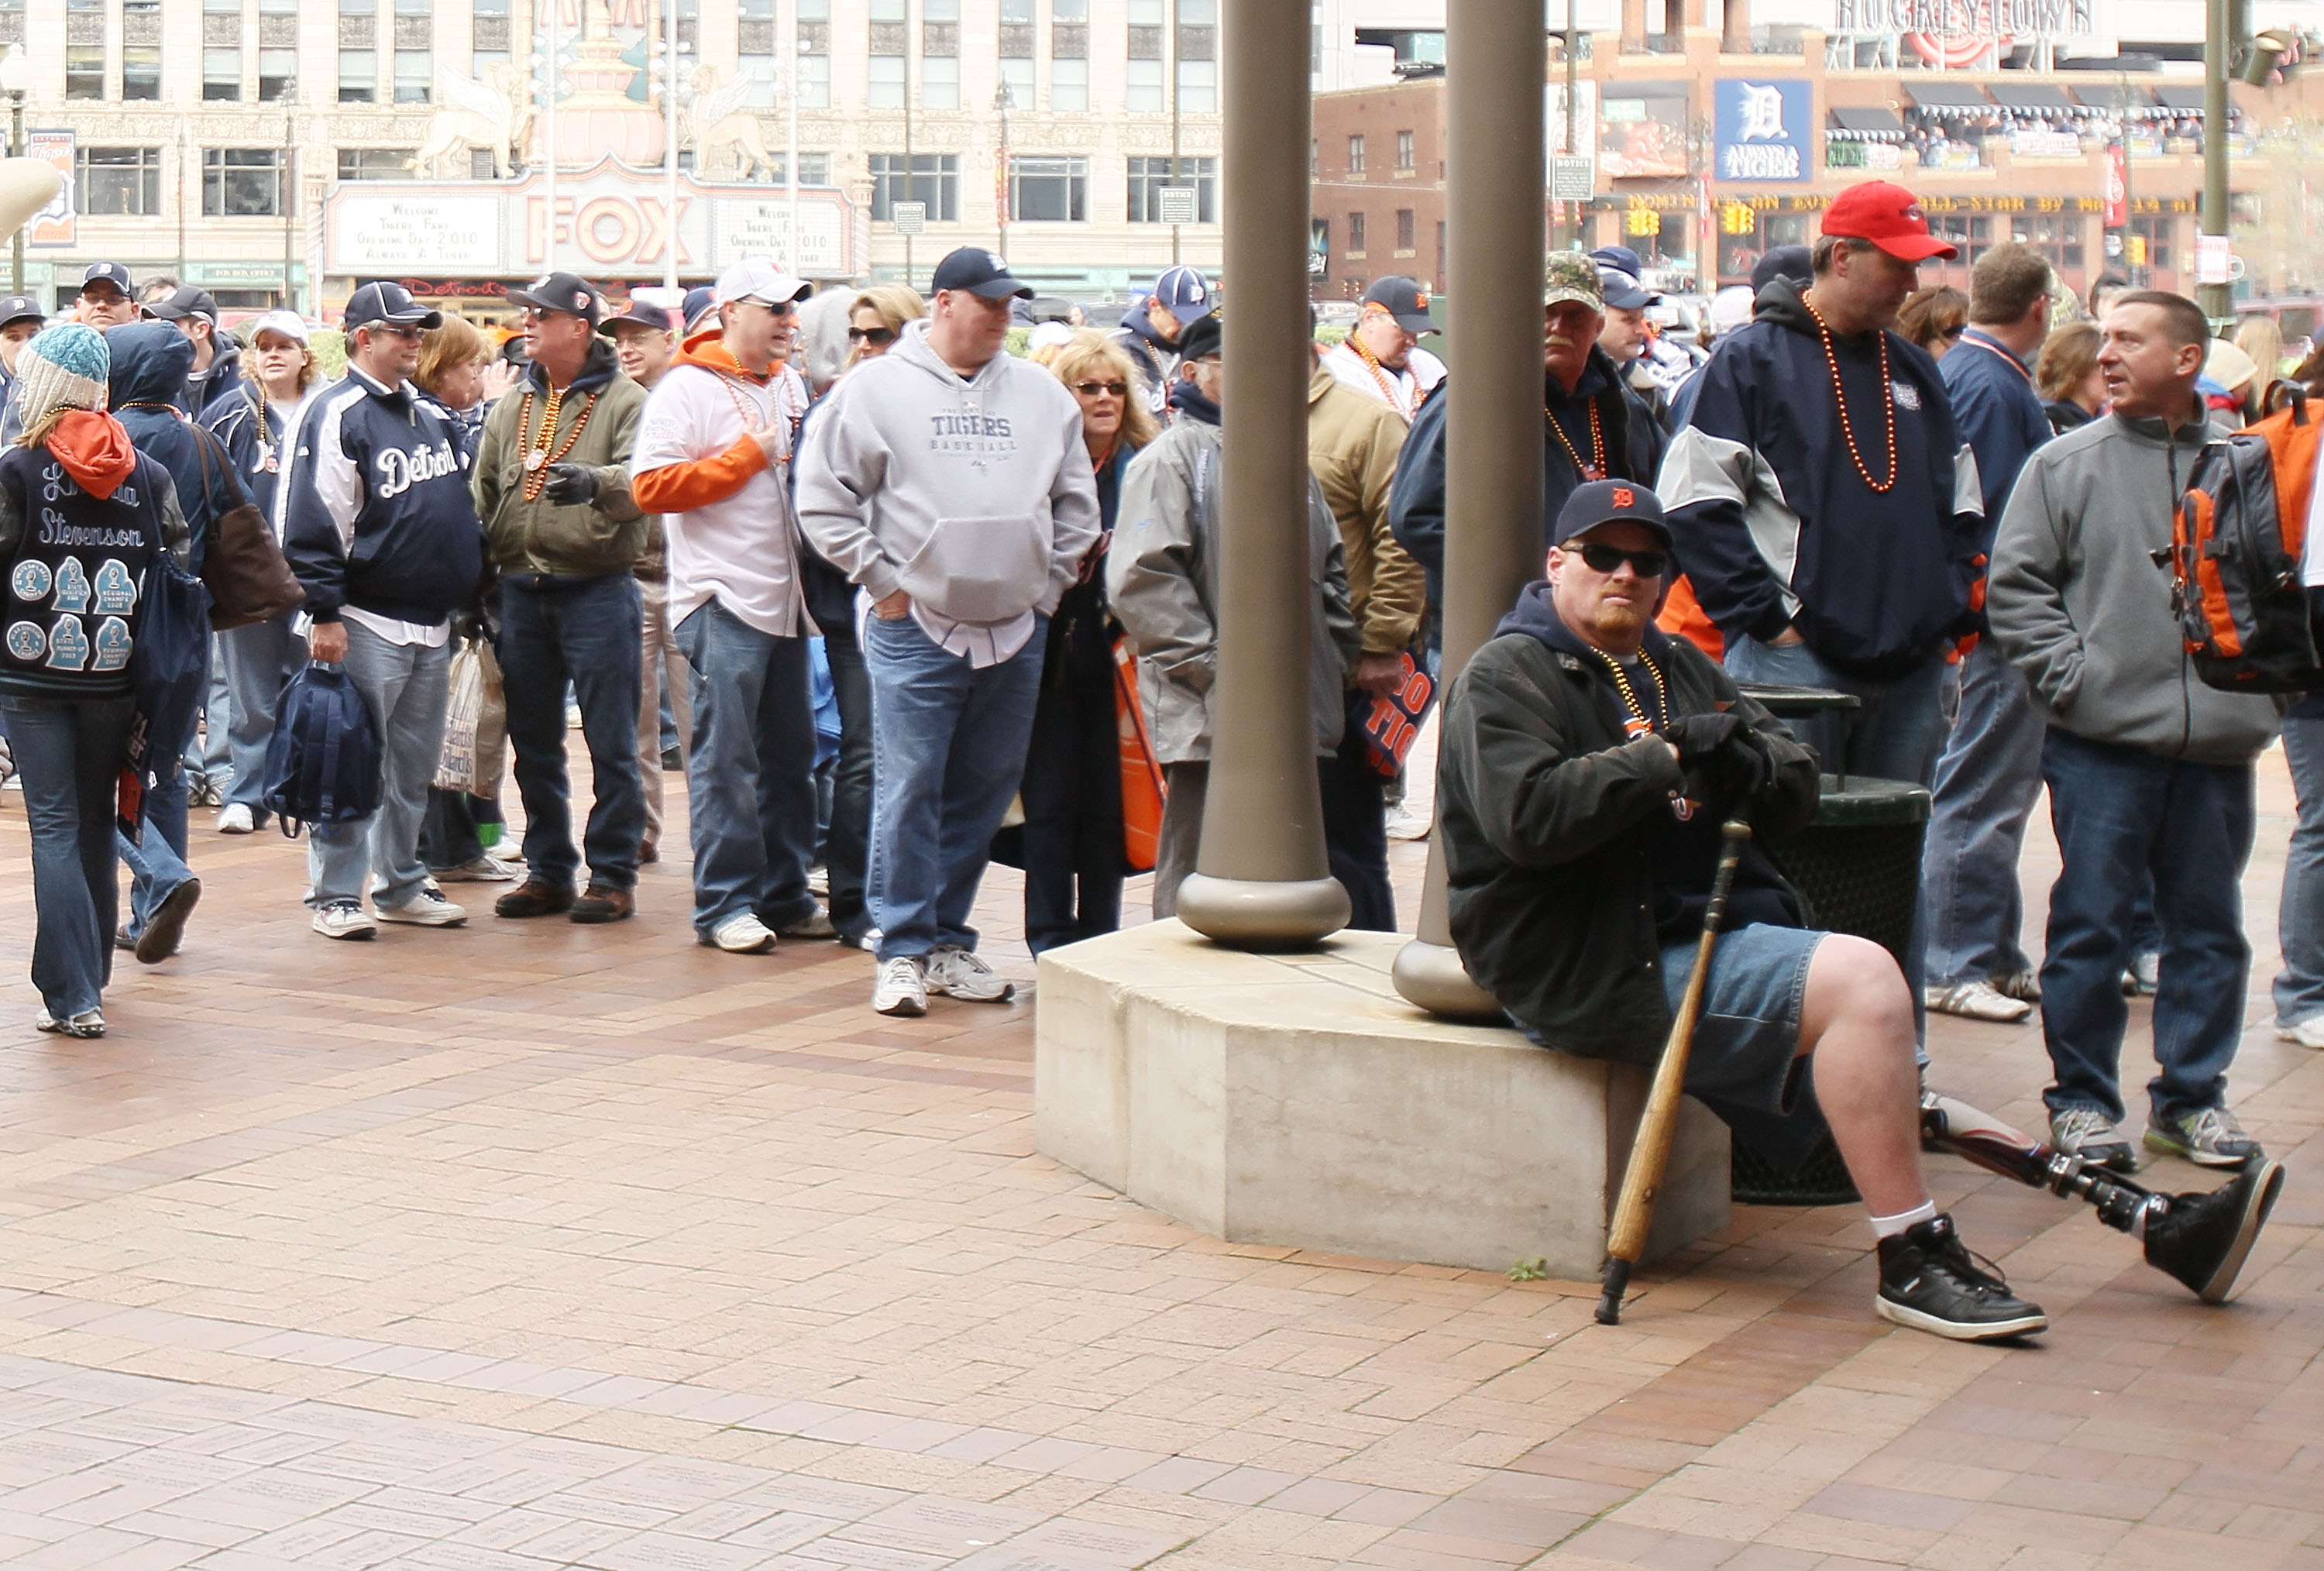 DETROIT - APRIL 09:  Fans wait in line to enter the ballpark before the game between Detroit Tigers and the Cleveland Indians on April 9, 2010 during Opening Day at Comerica Park in Detroit, Michigan.  (Photo by Elsa/Getty Images)